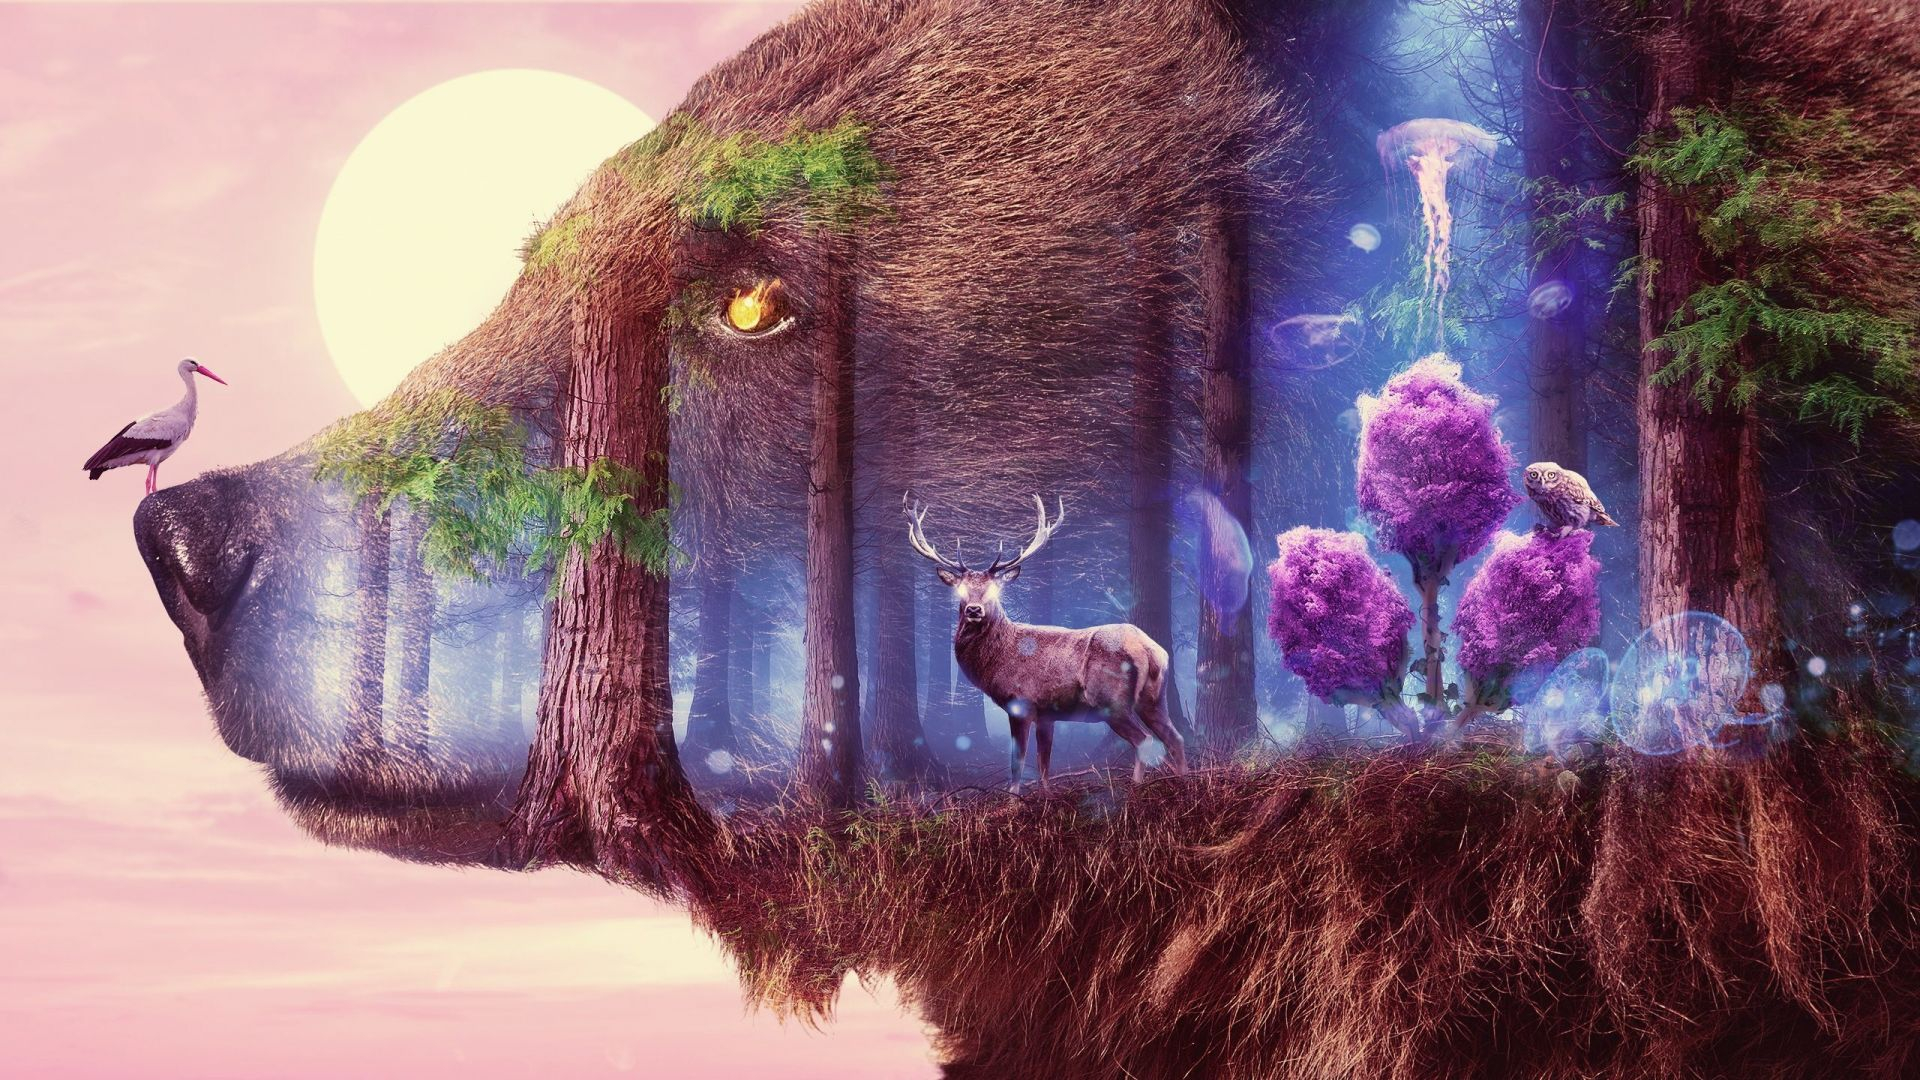 1920x1080 Desktop Wallpaper Mystical, Fantasy, Forest, Wildlife, Art, Hd Image, Picture, Background, Aaa664